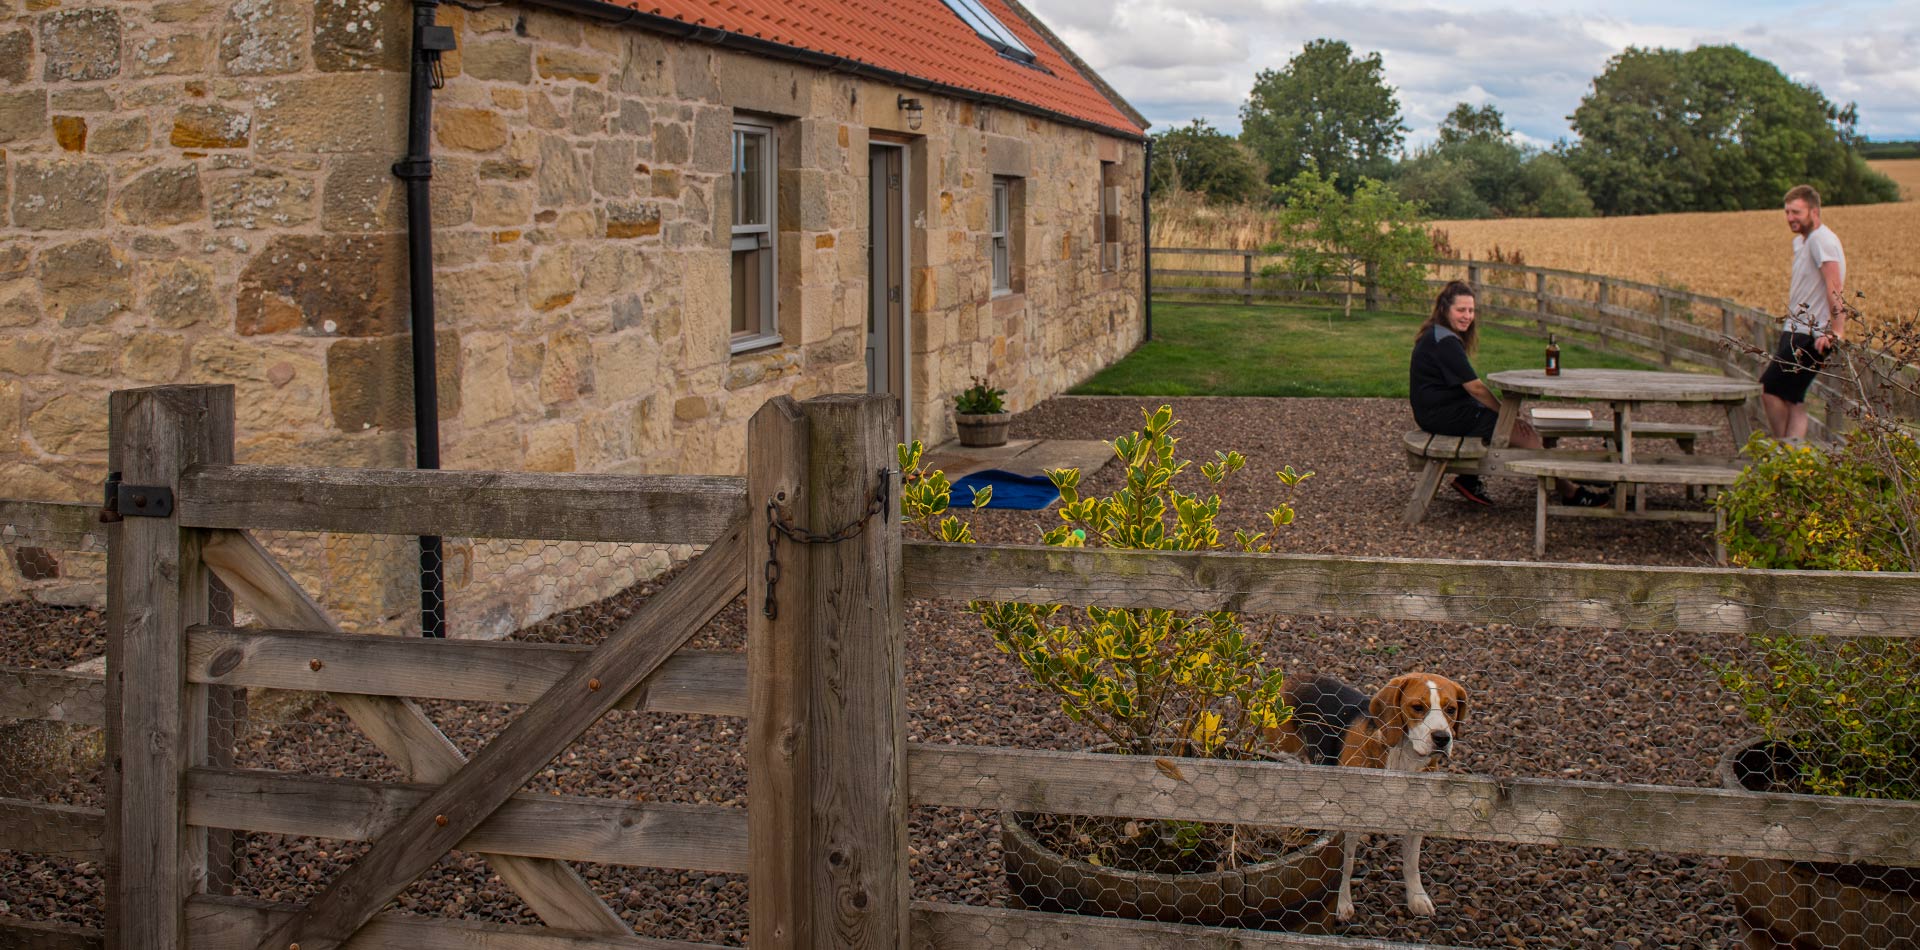 The Smithy cottage enclosed garden with dog at fence